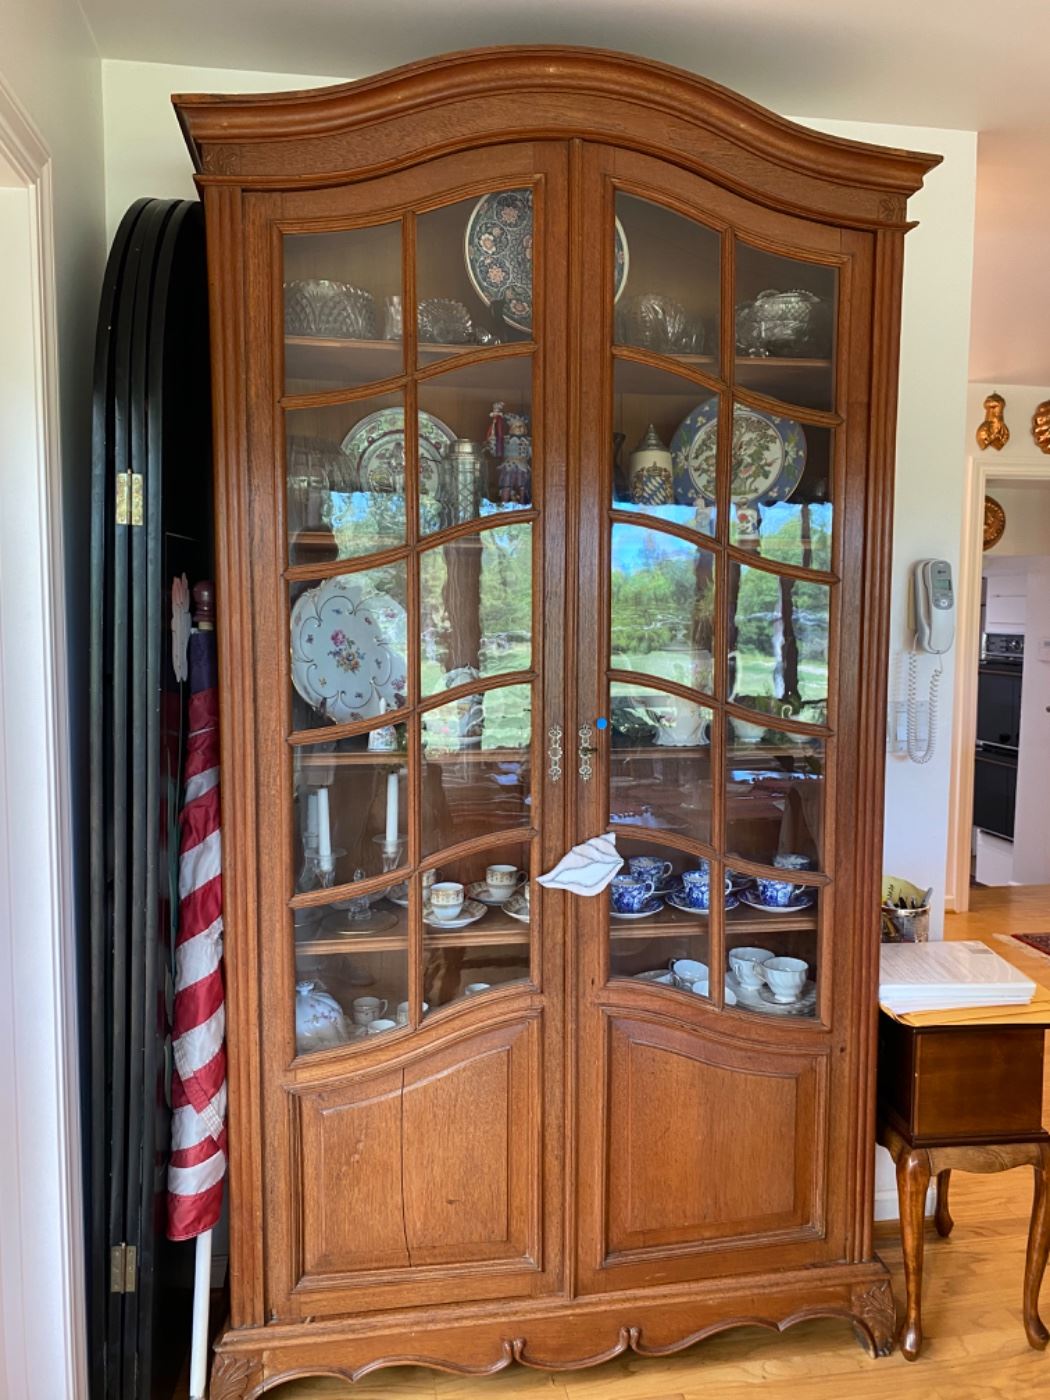 Just one of the China Cabinets!